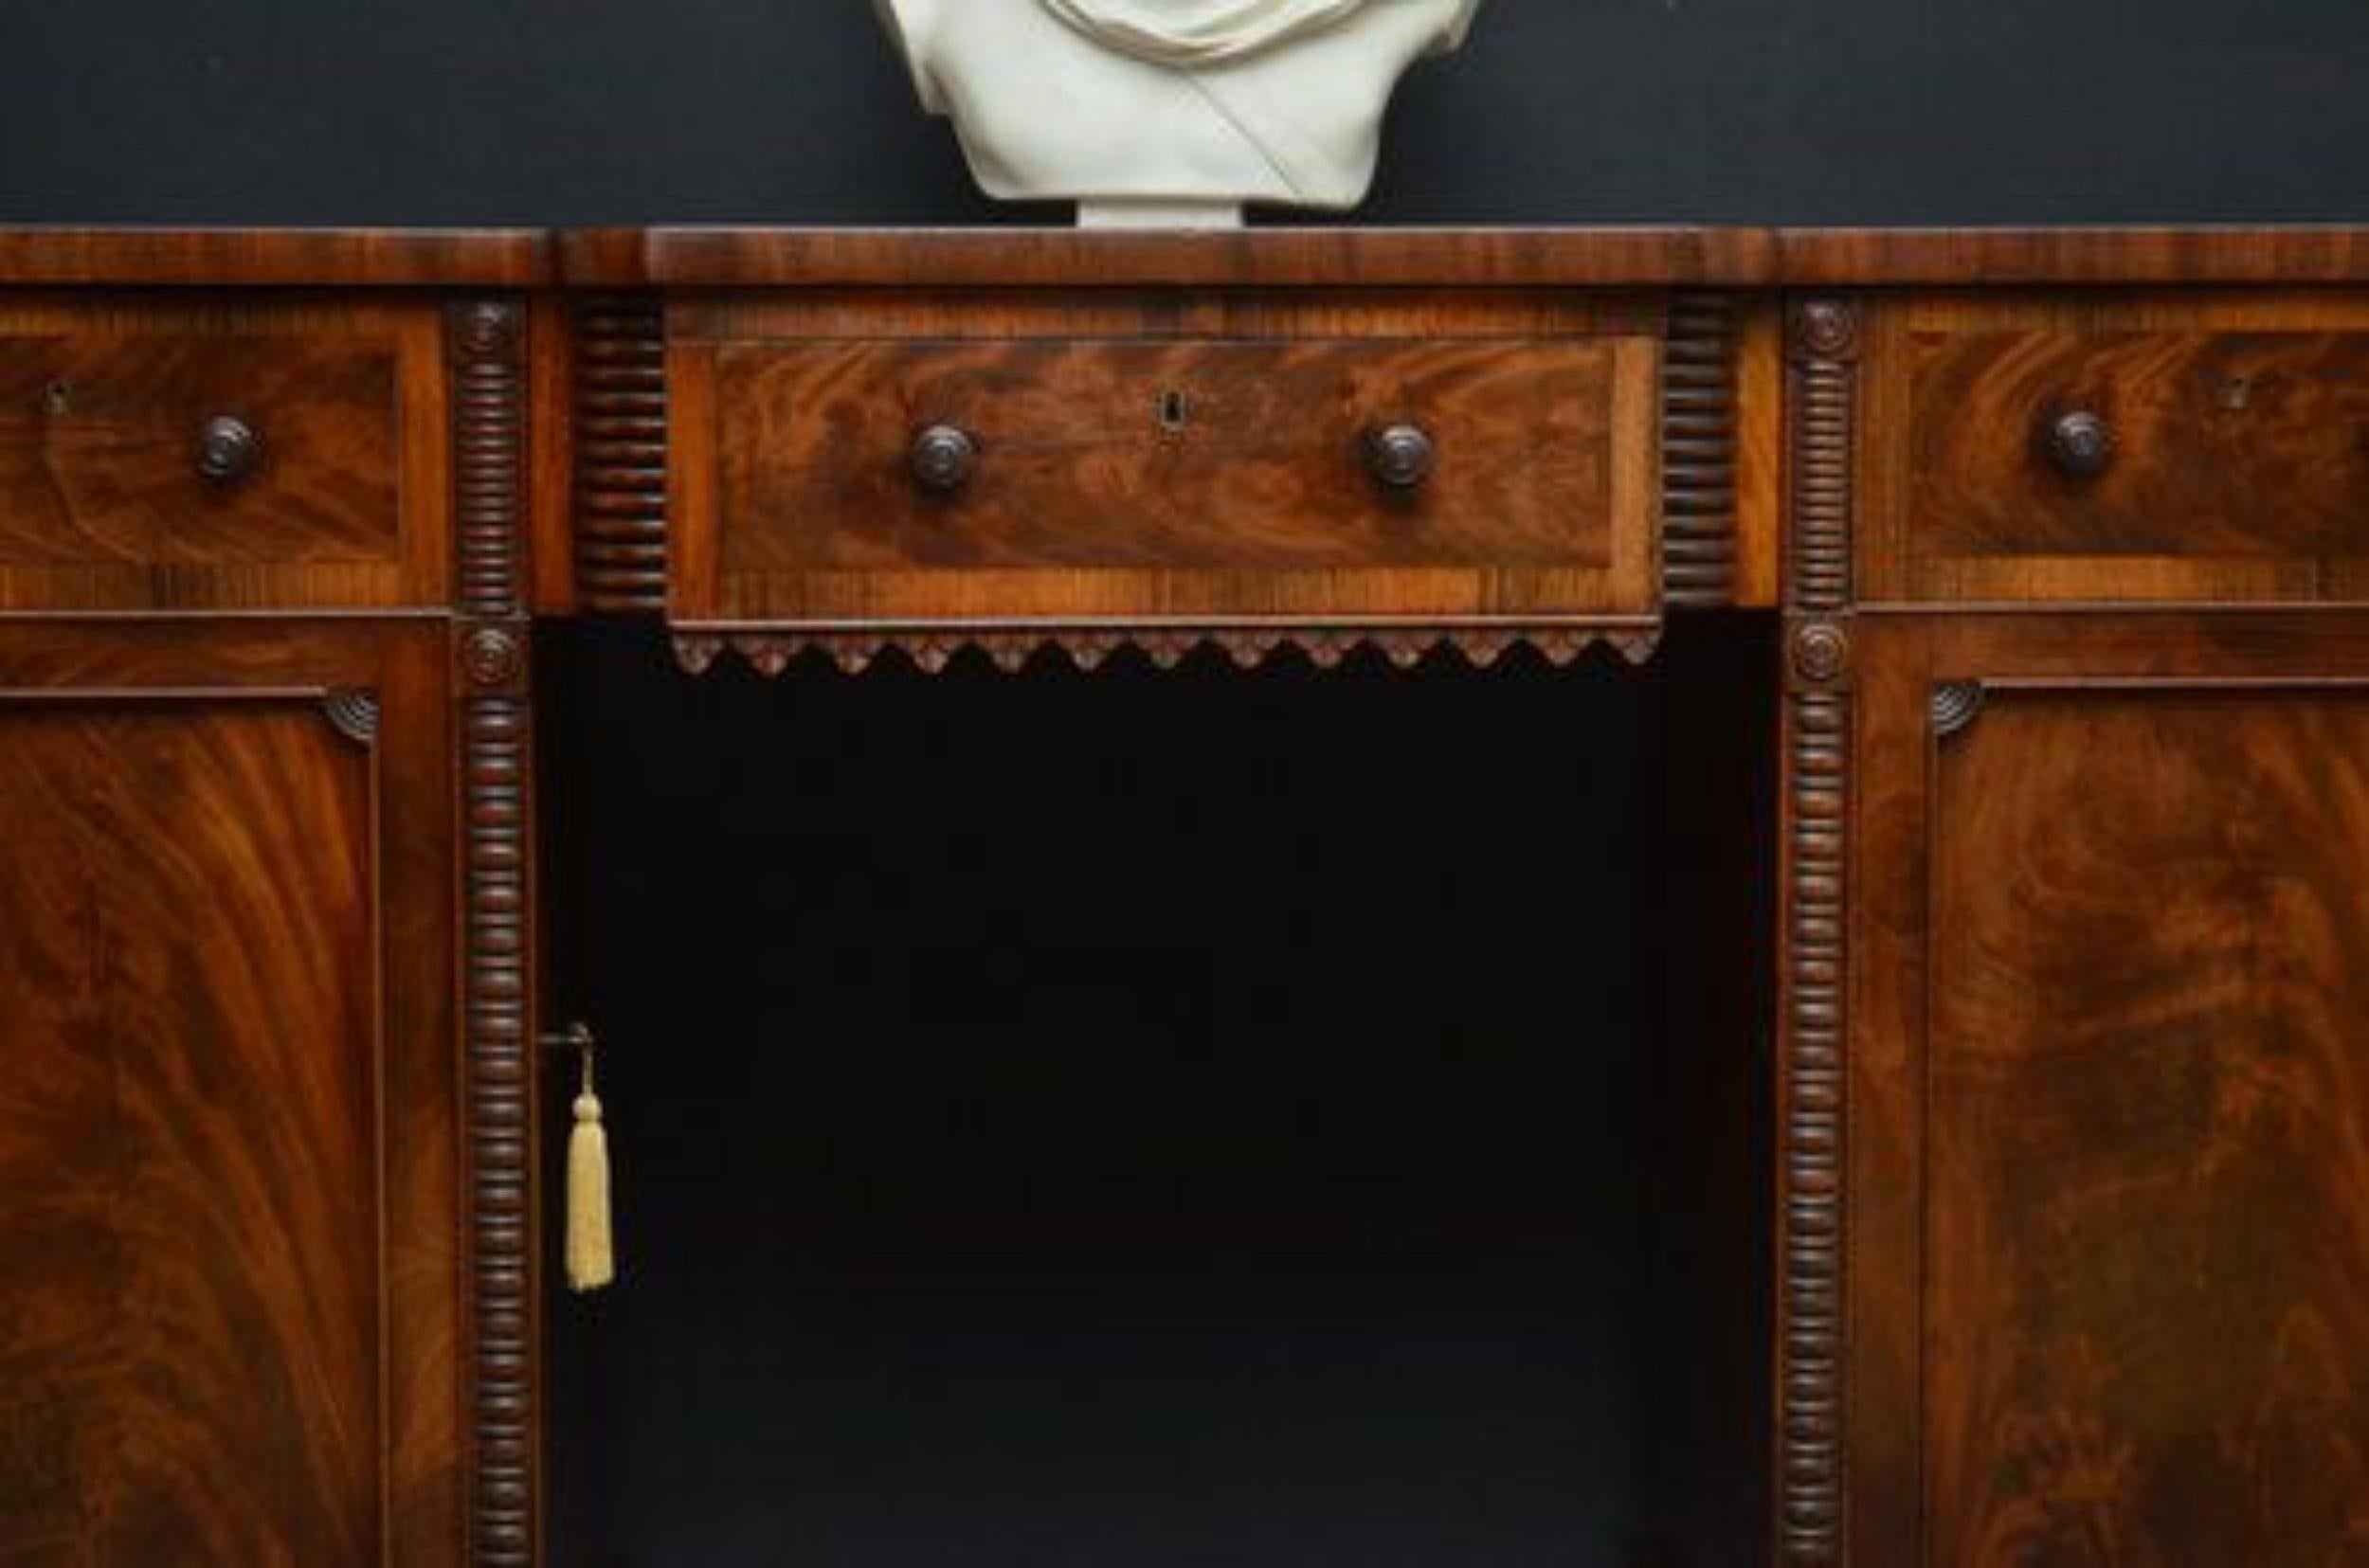 Superb Regency Sideboard in Mahogany In Good Condition For Sale In Whaley Bridge, GB